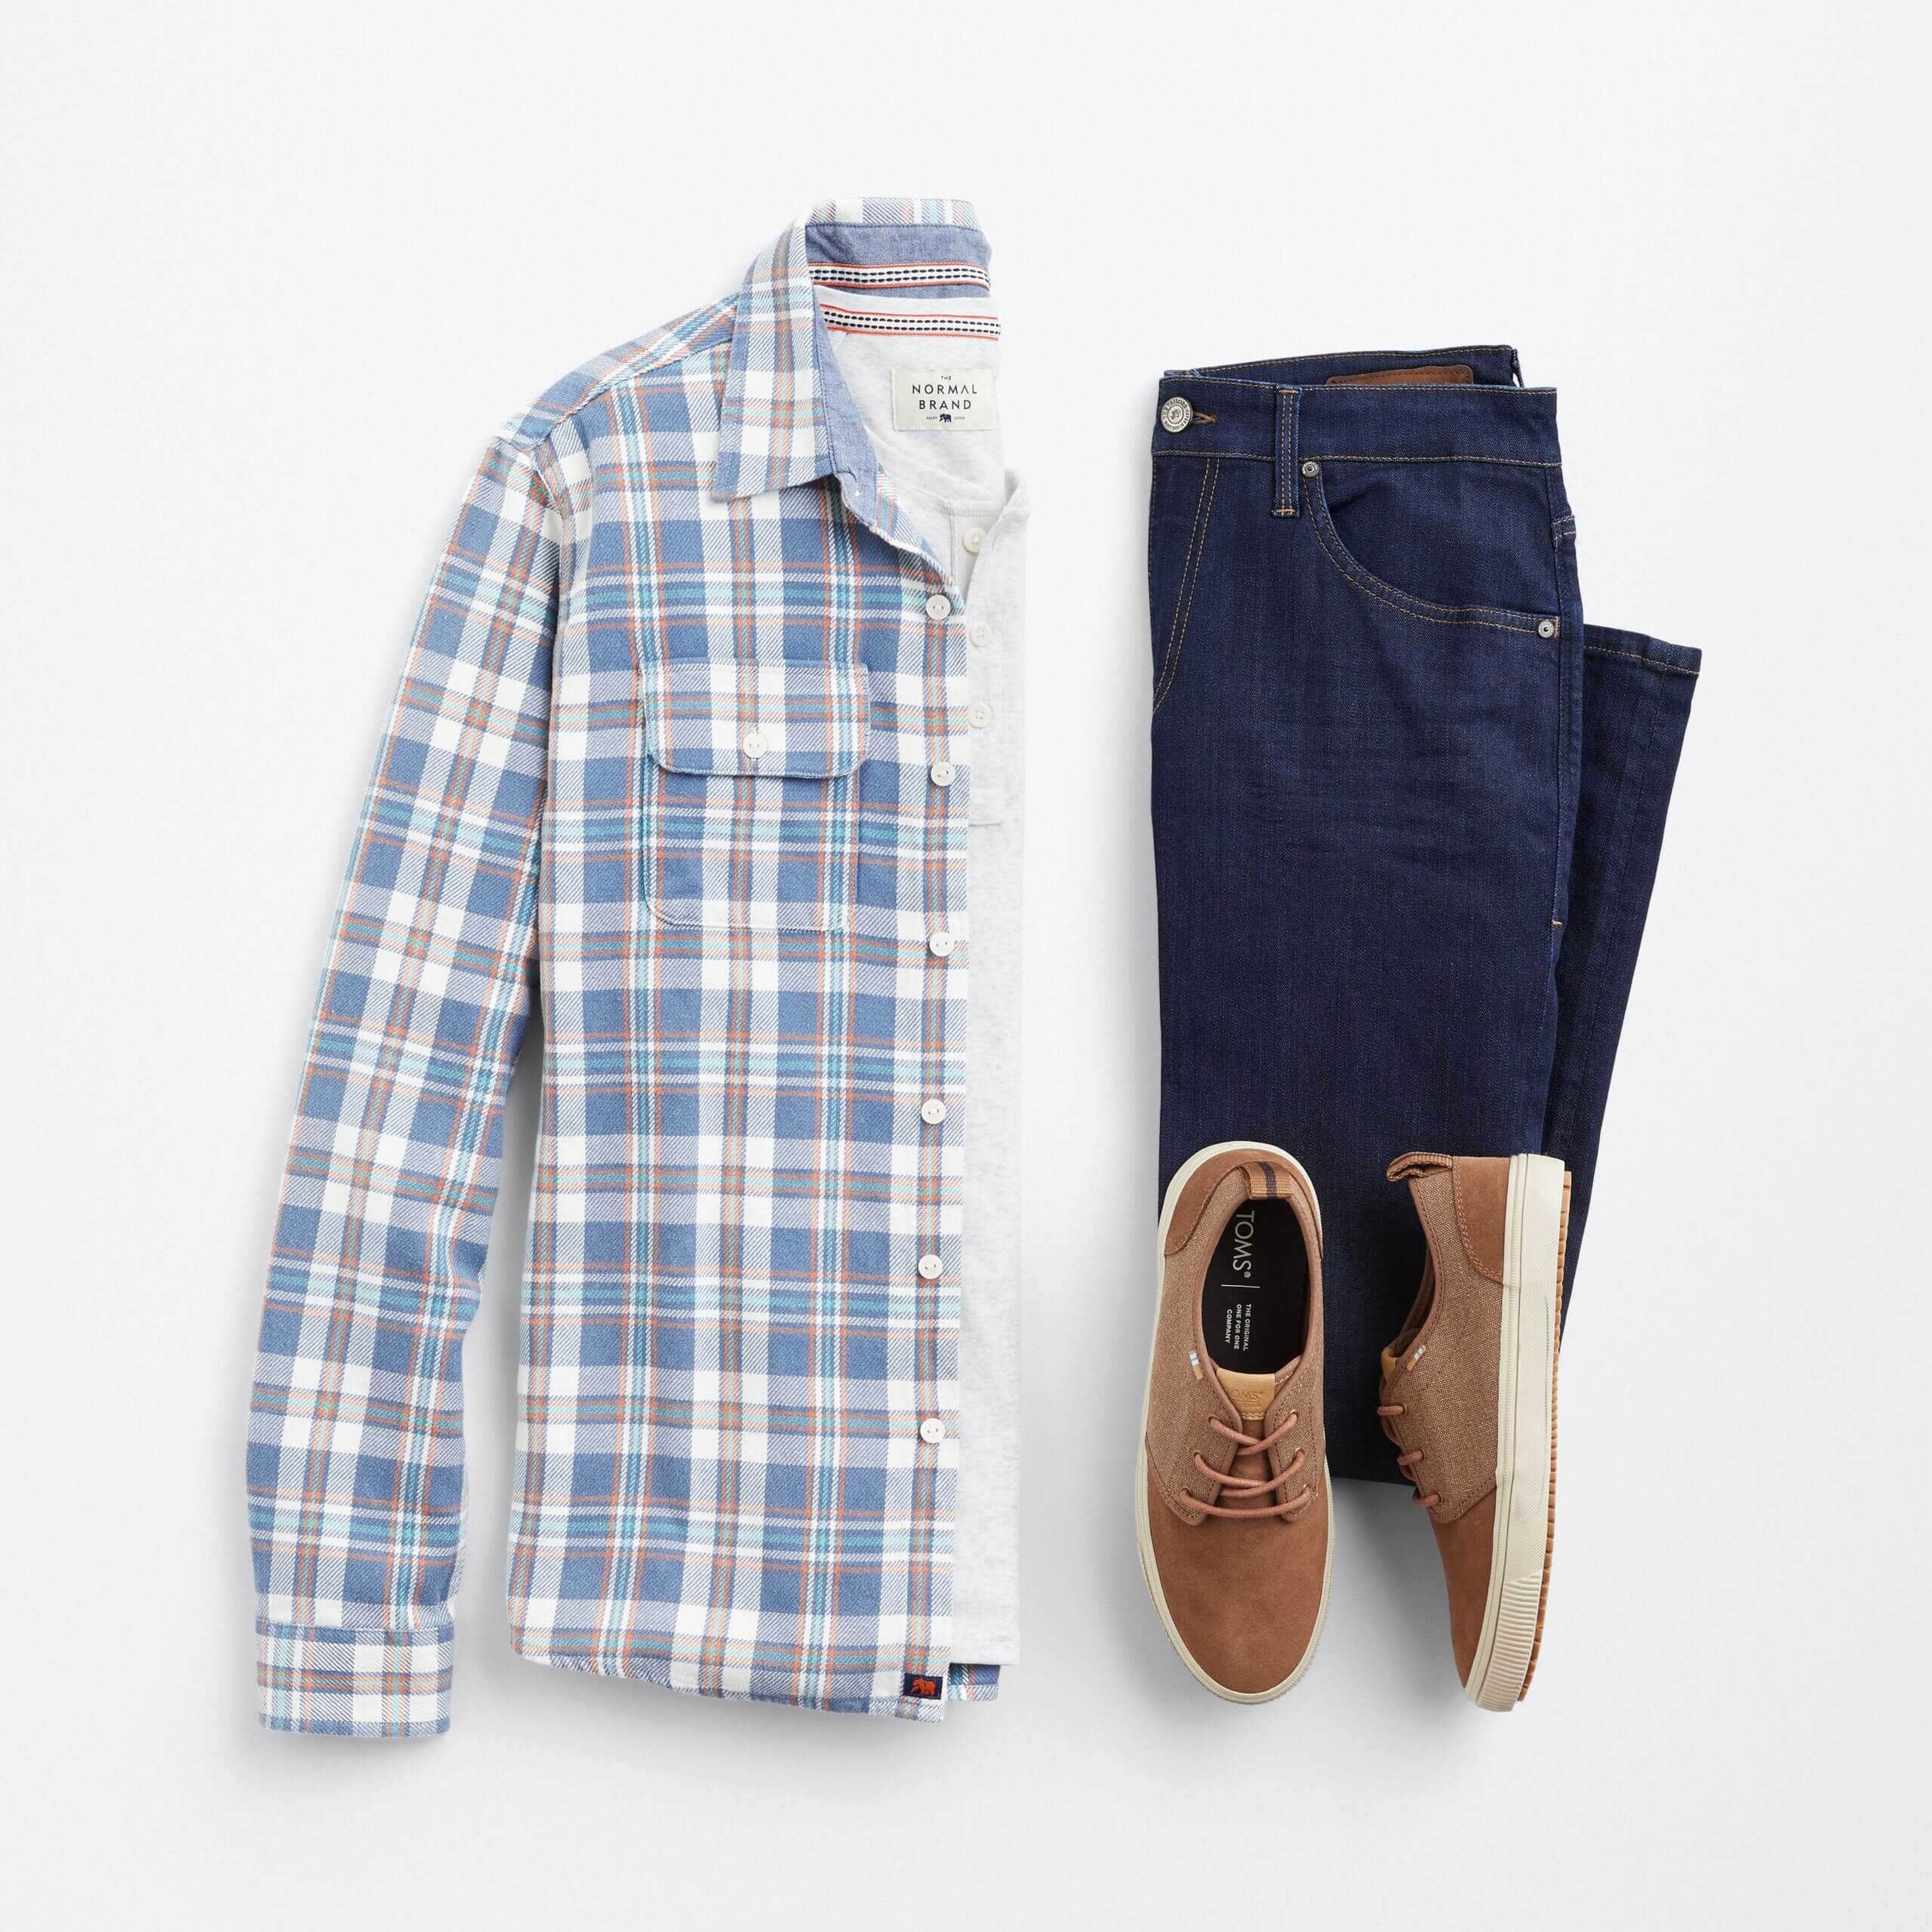 Stitch Fix men's outfit laydown featuring blue button-down over grey henley, blue jeans and brown sneakers. 